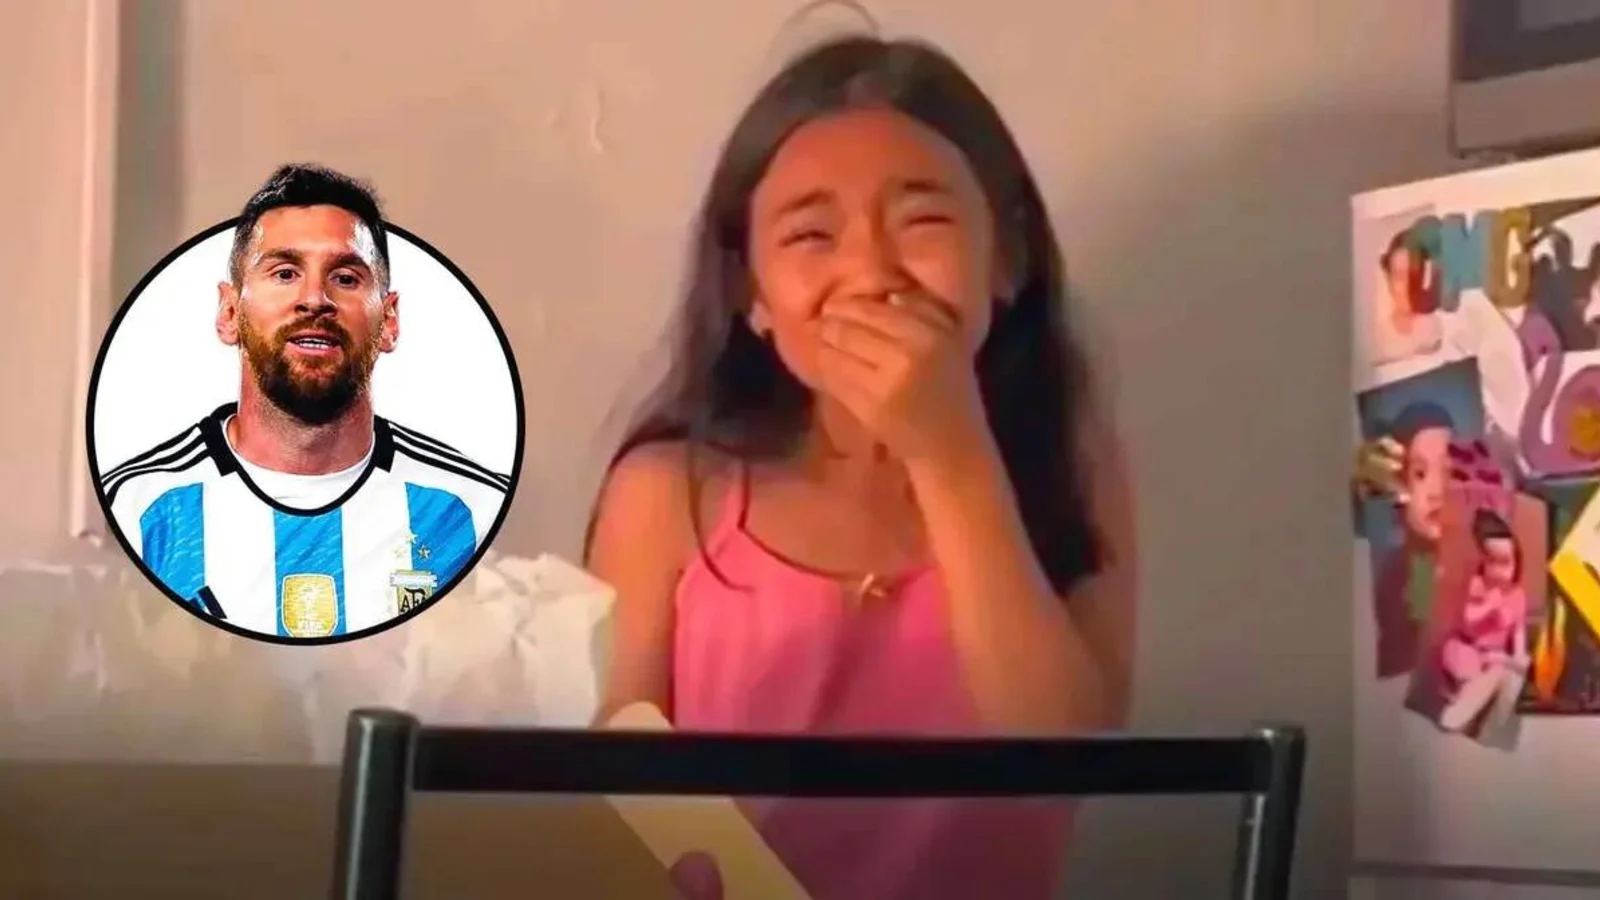 Lionel Messi provokes an emotional reaction from El Salvador fan